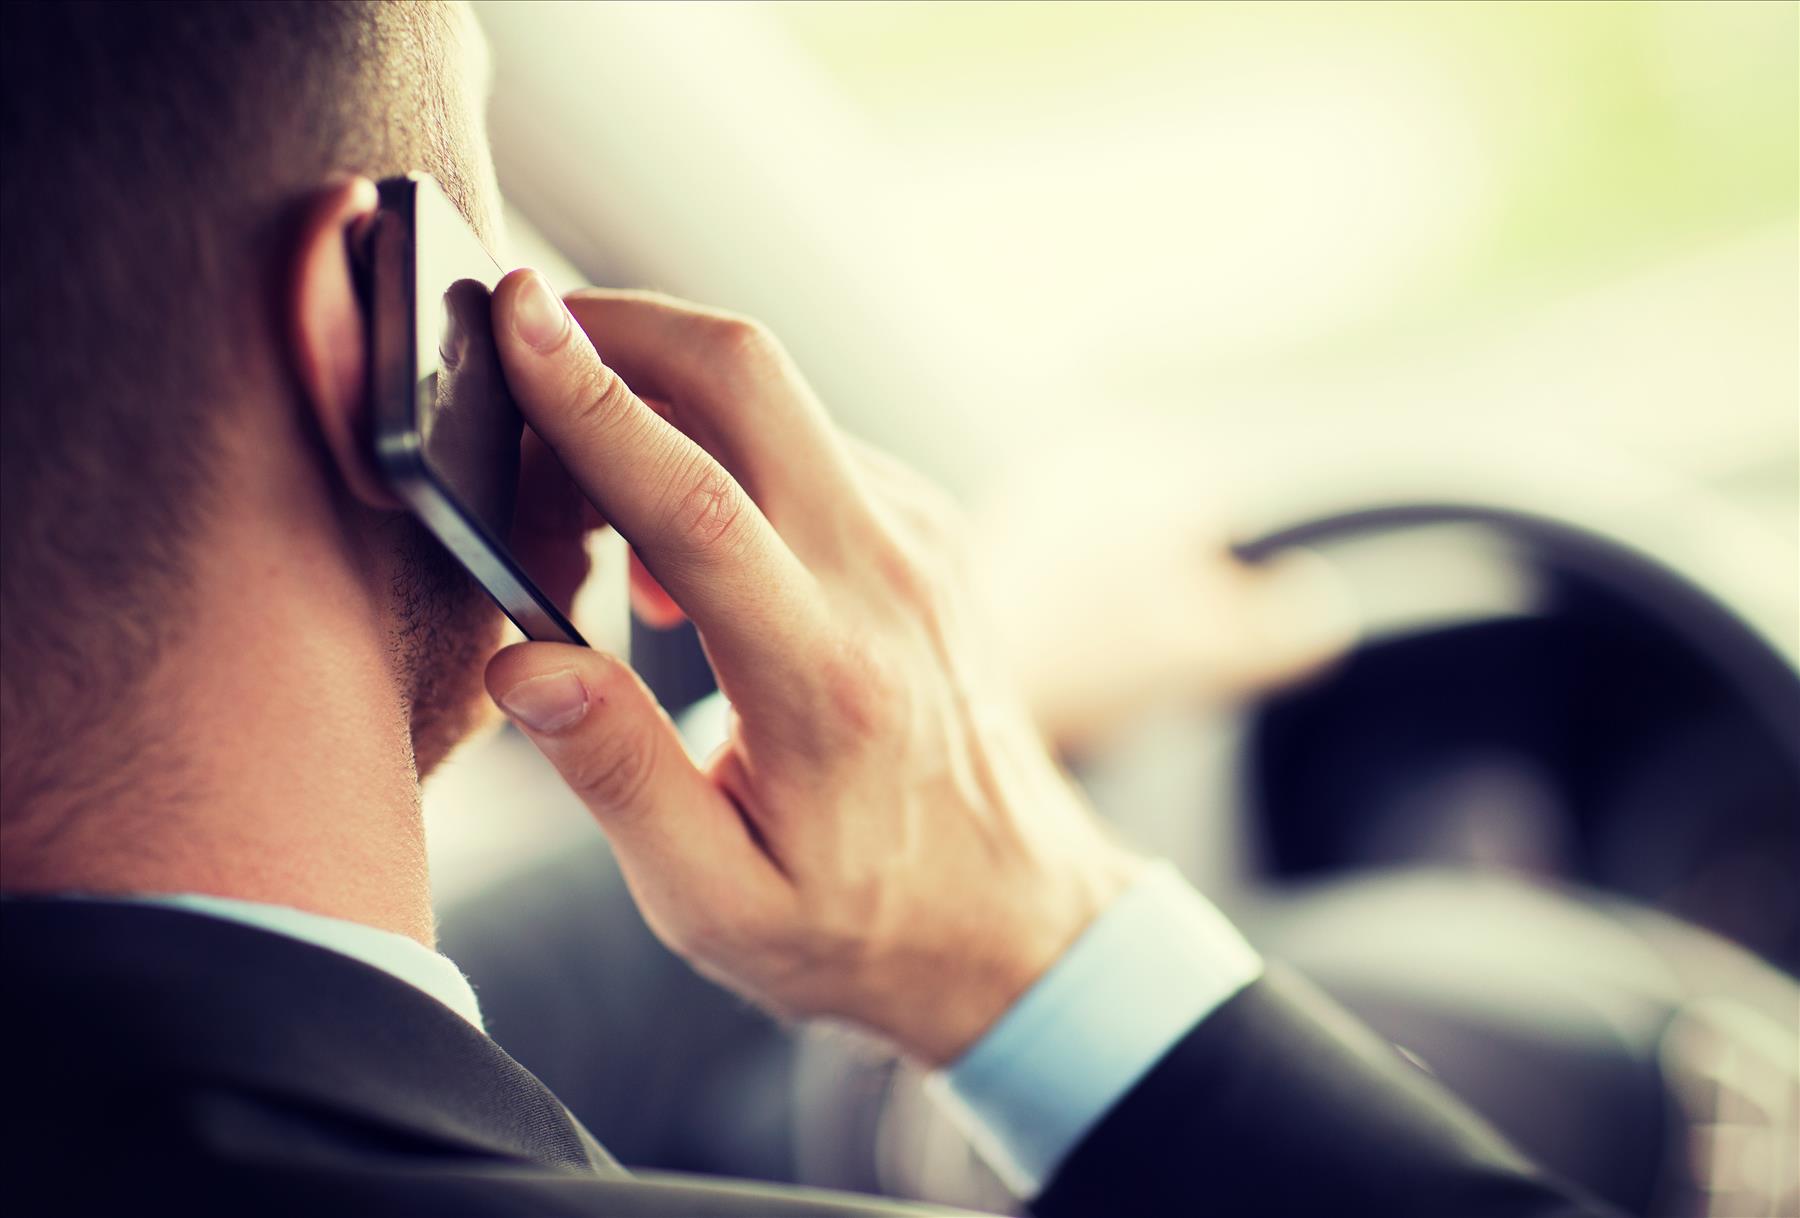 Car Accident Injuries Due to Distracted Driving